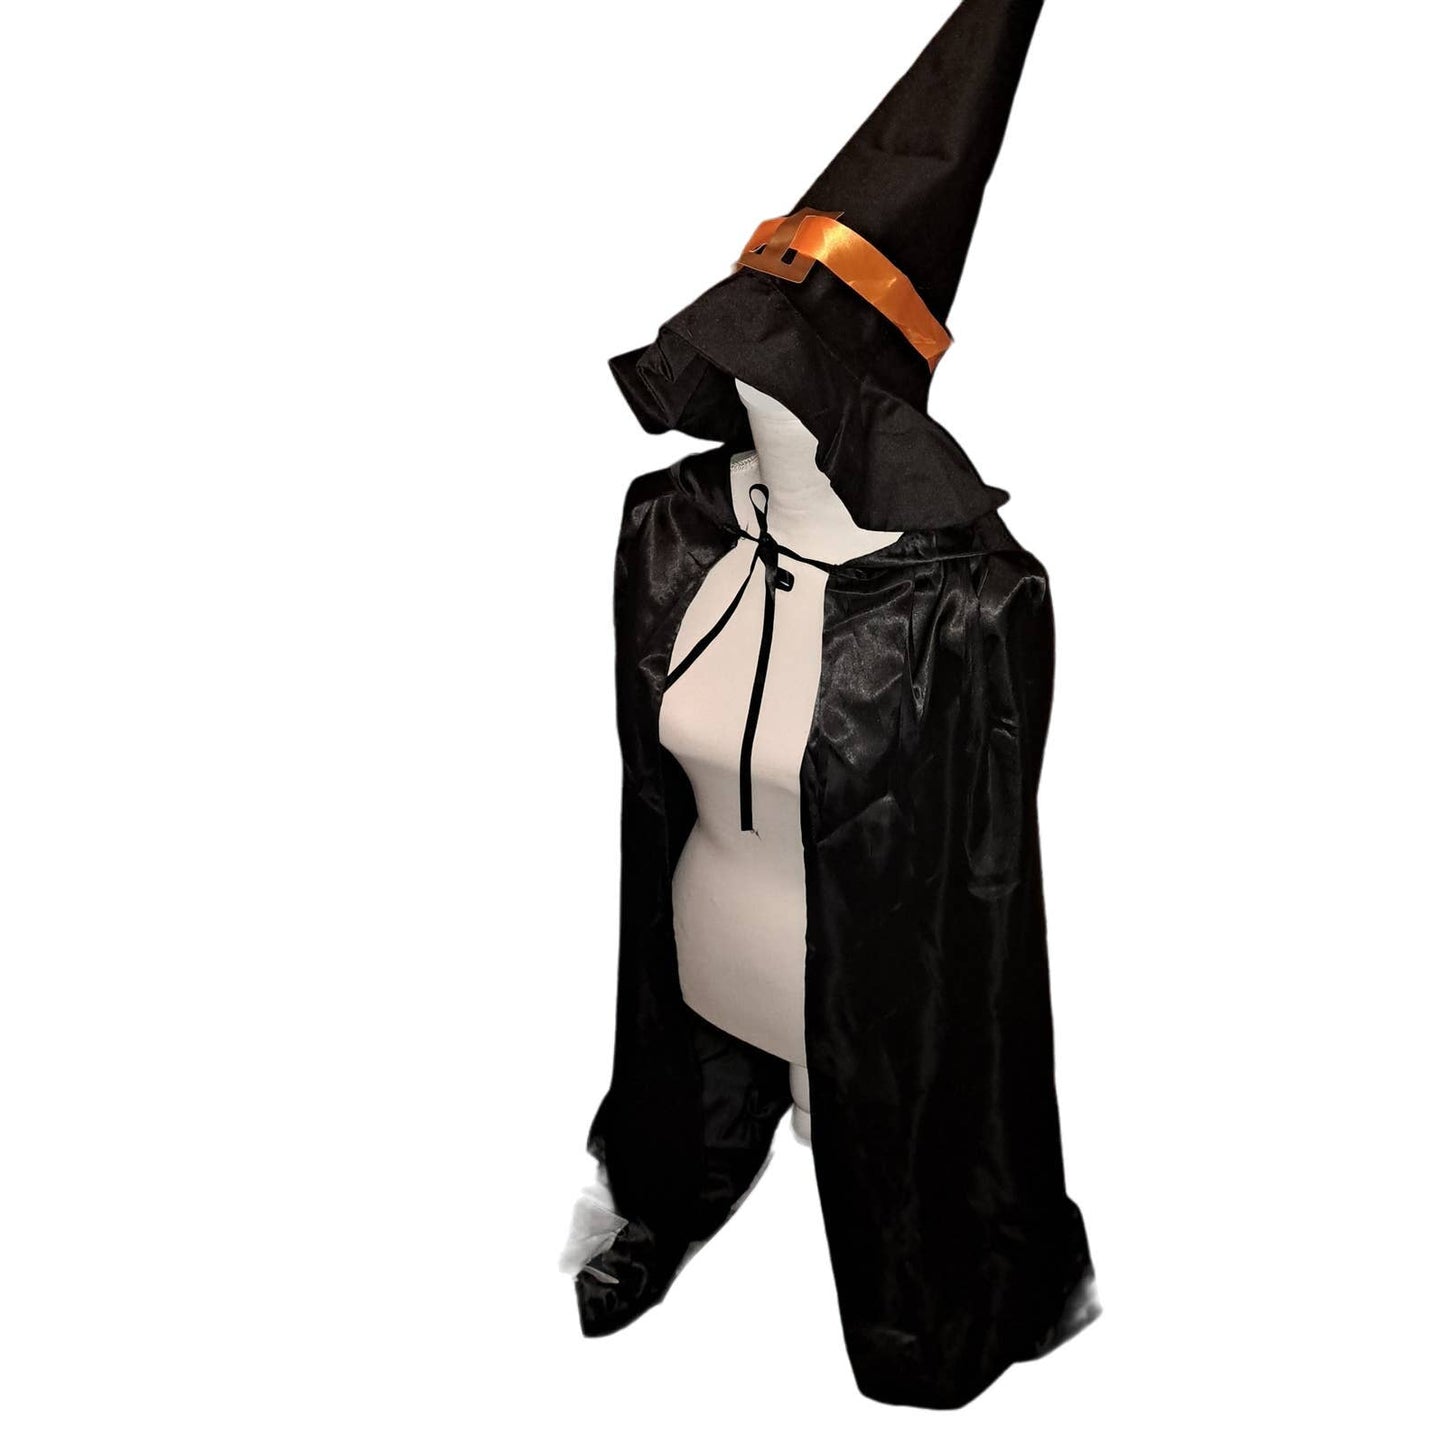 Halloween SALE! Well Made REUSE for years Adult size Witch hat & Cape